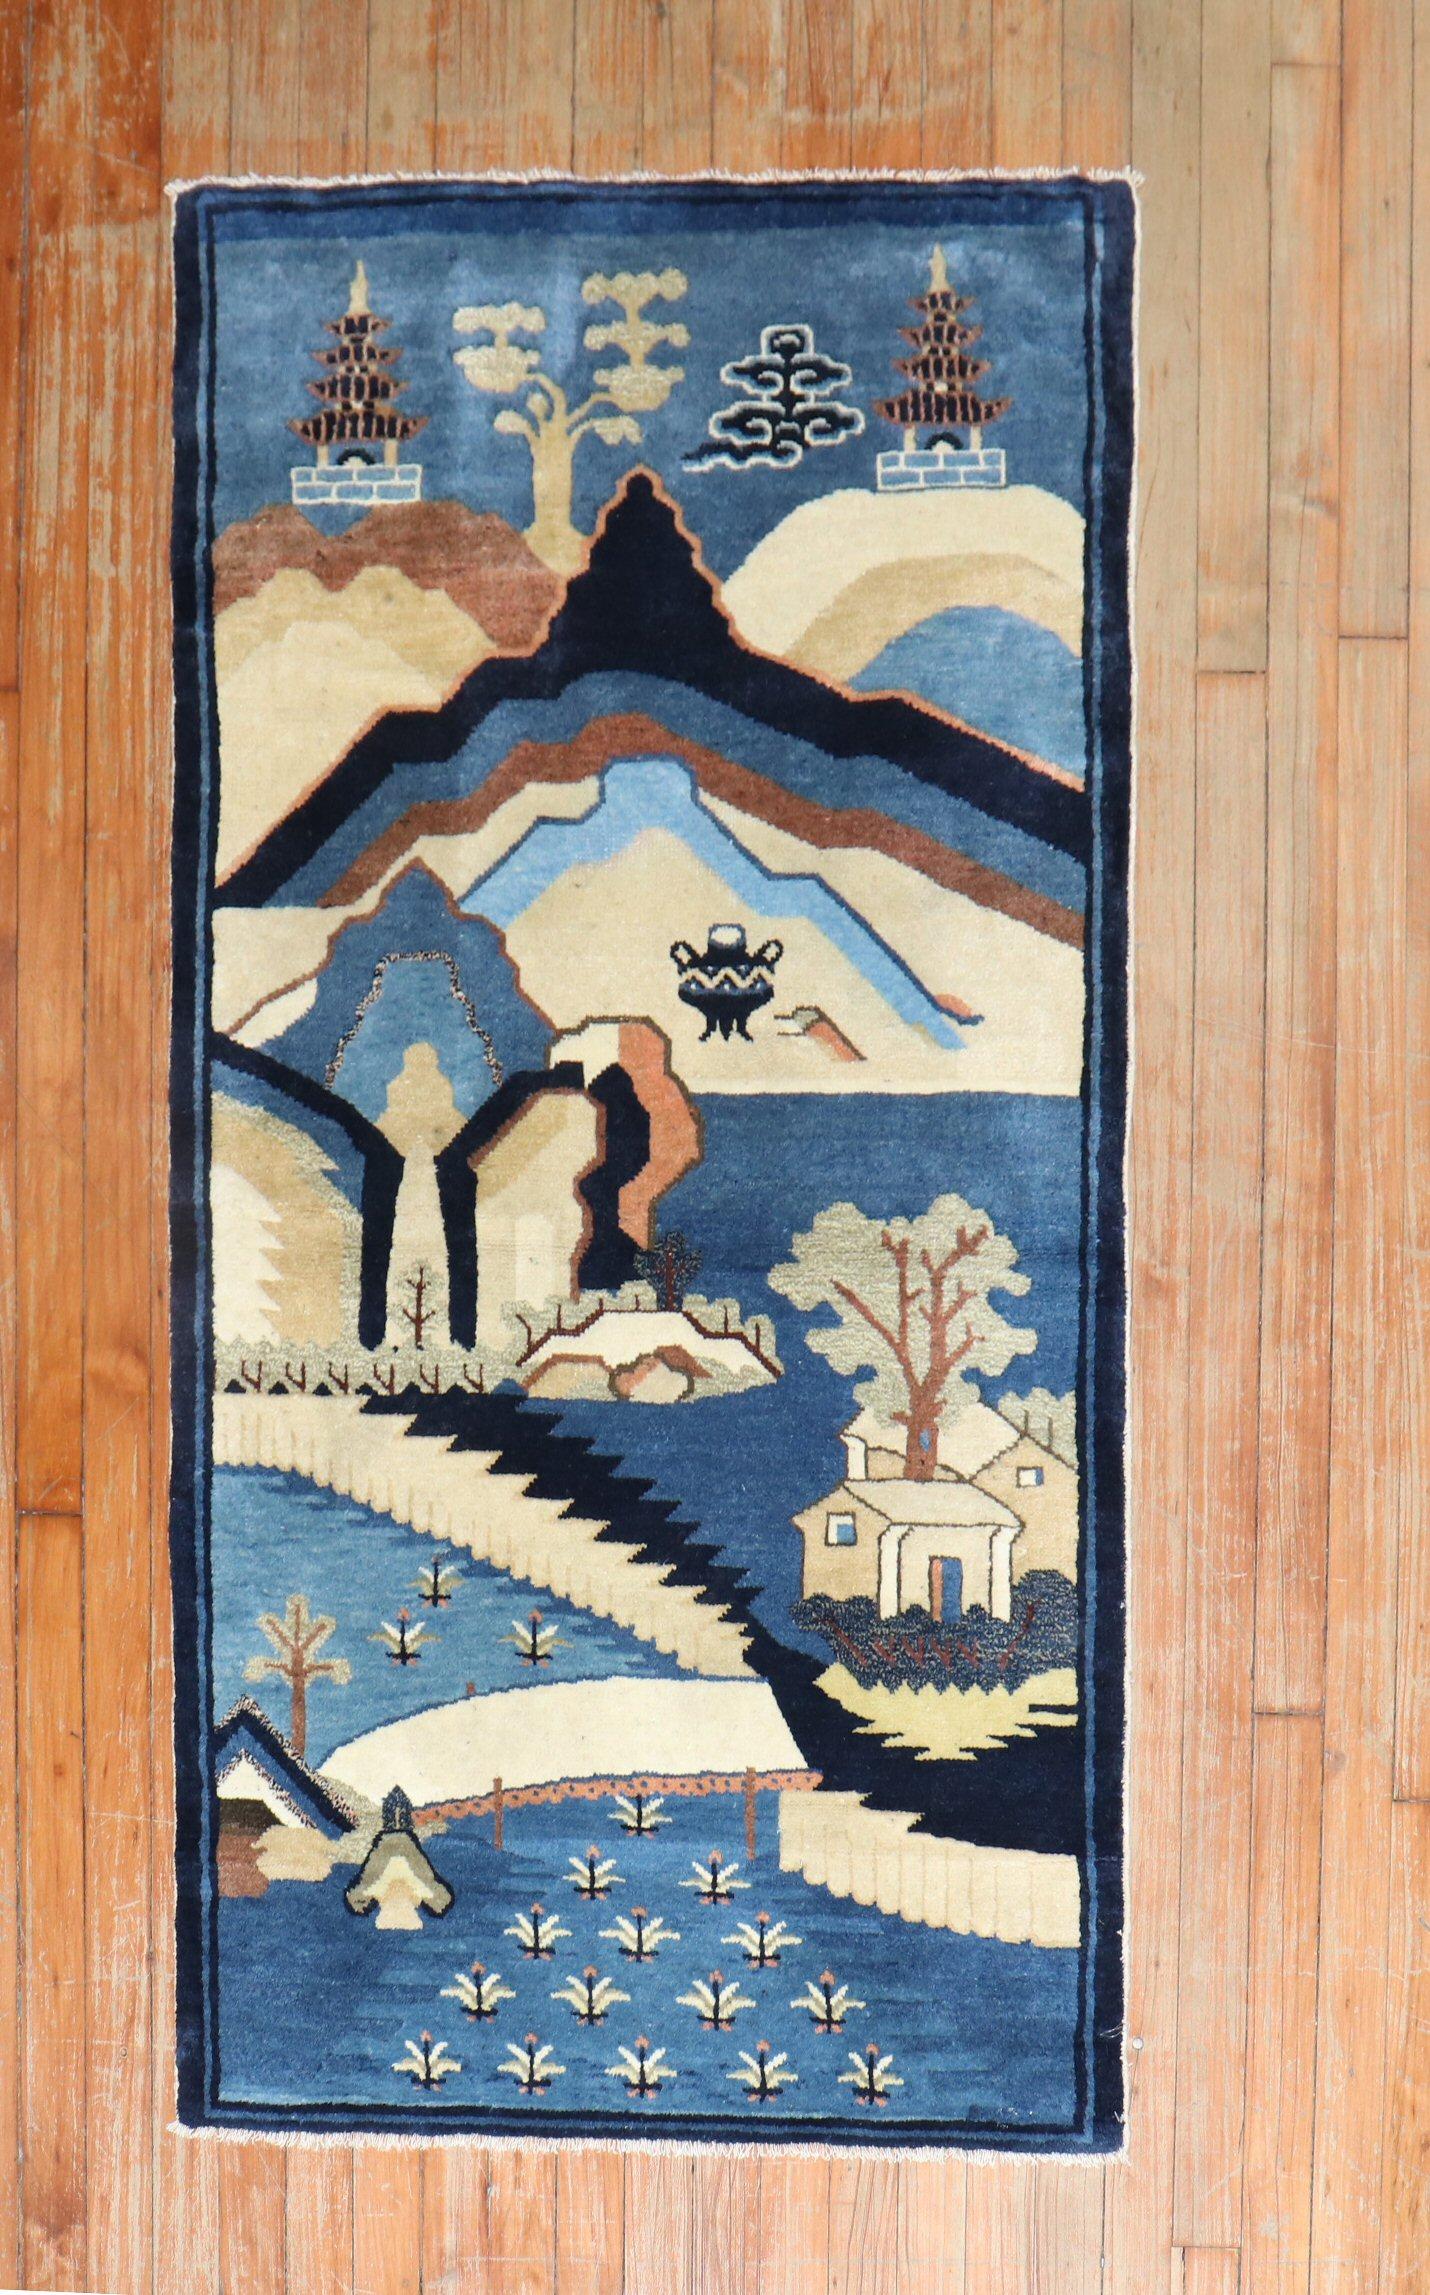 An early 20th century Chinese pictorial throw-size rug 

Measures: 2'8' x 5'.